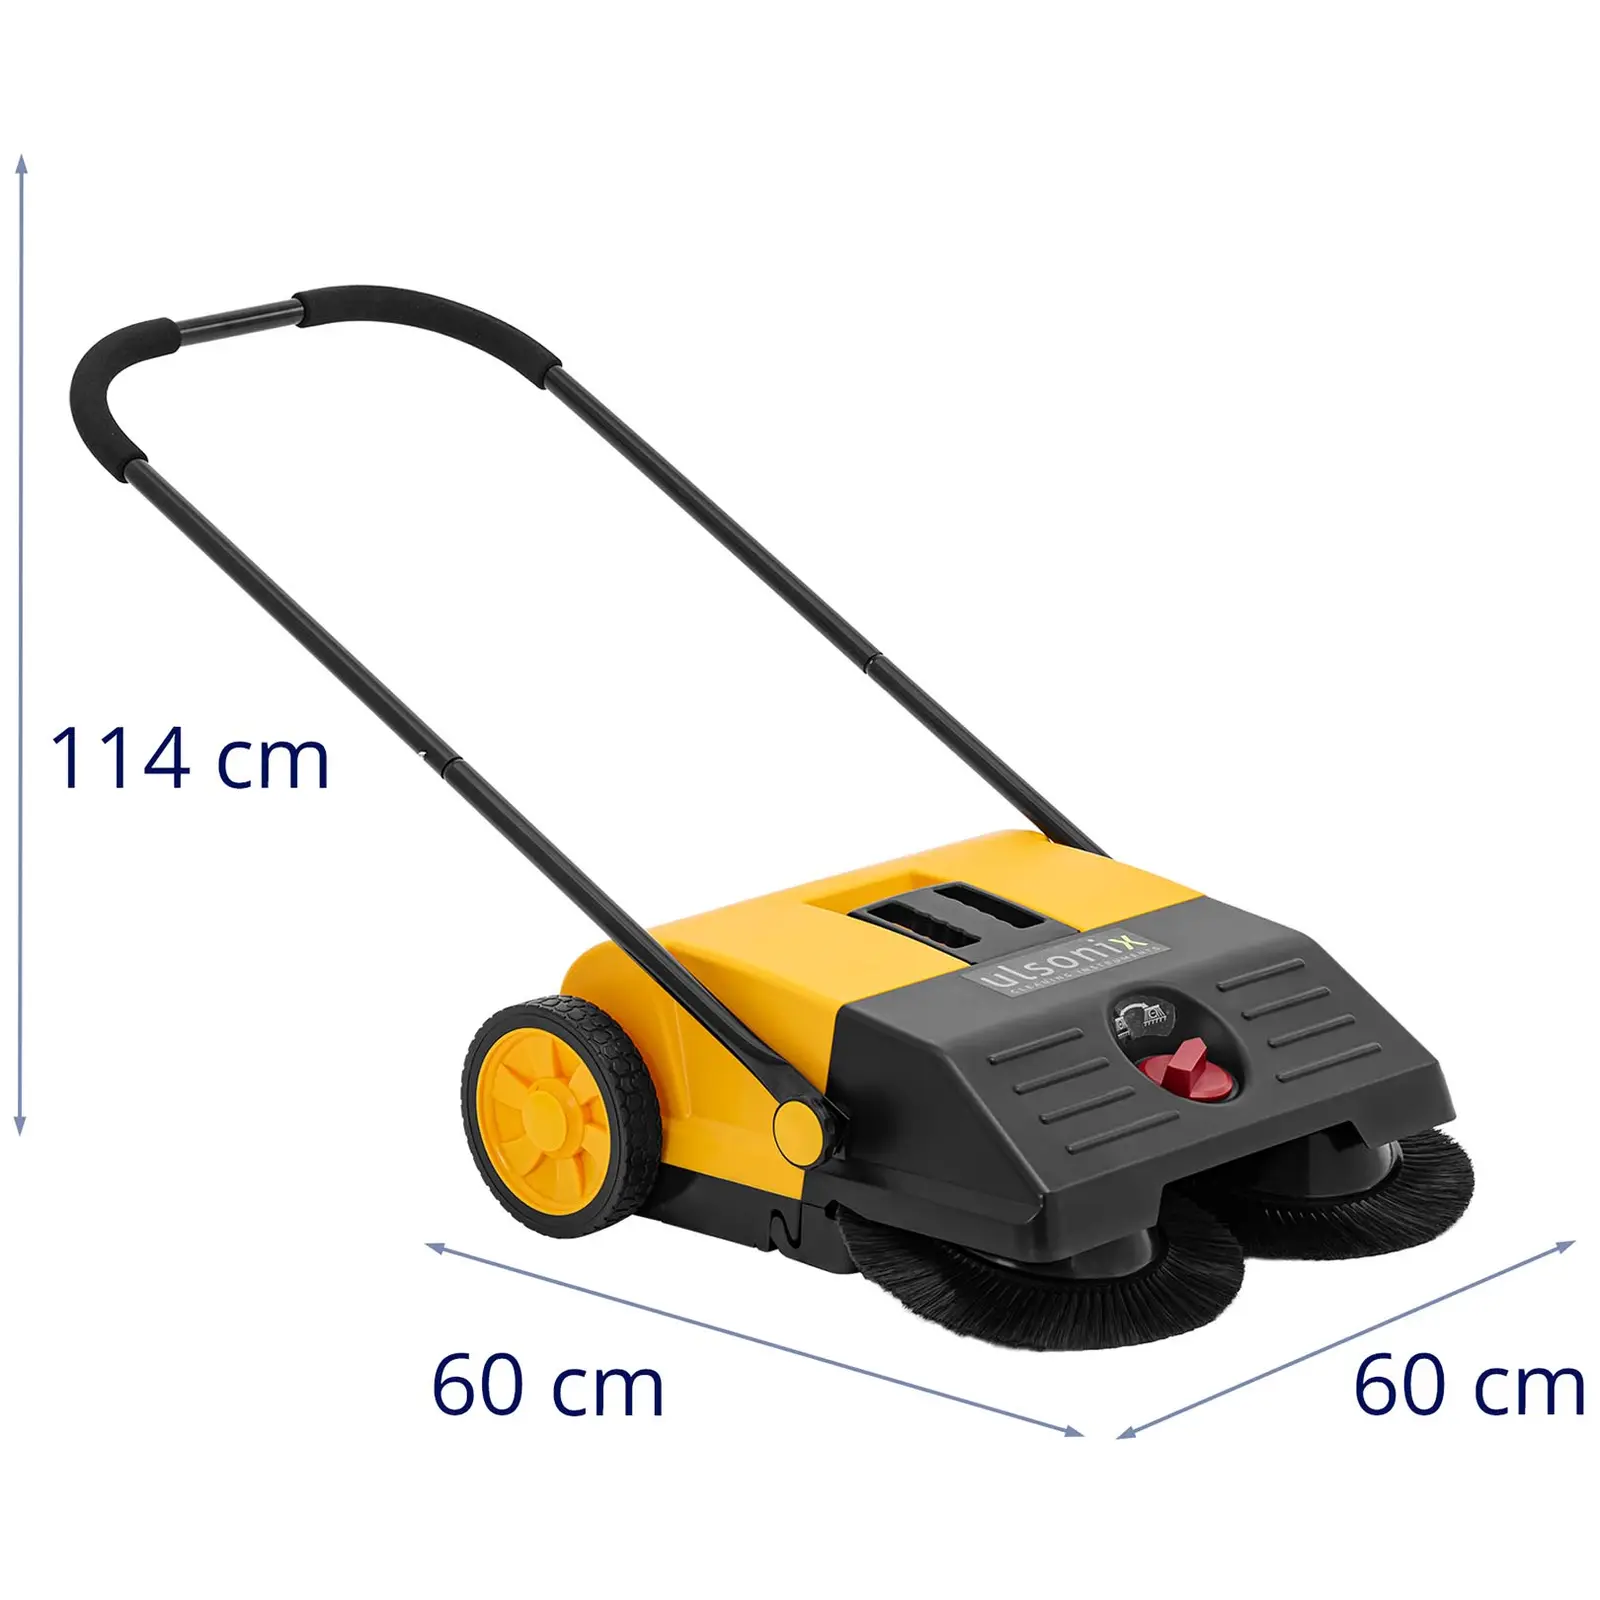 Manual Sweeper - 2 side brushes - 1800 m²/h